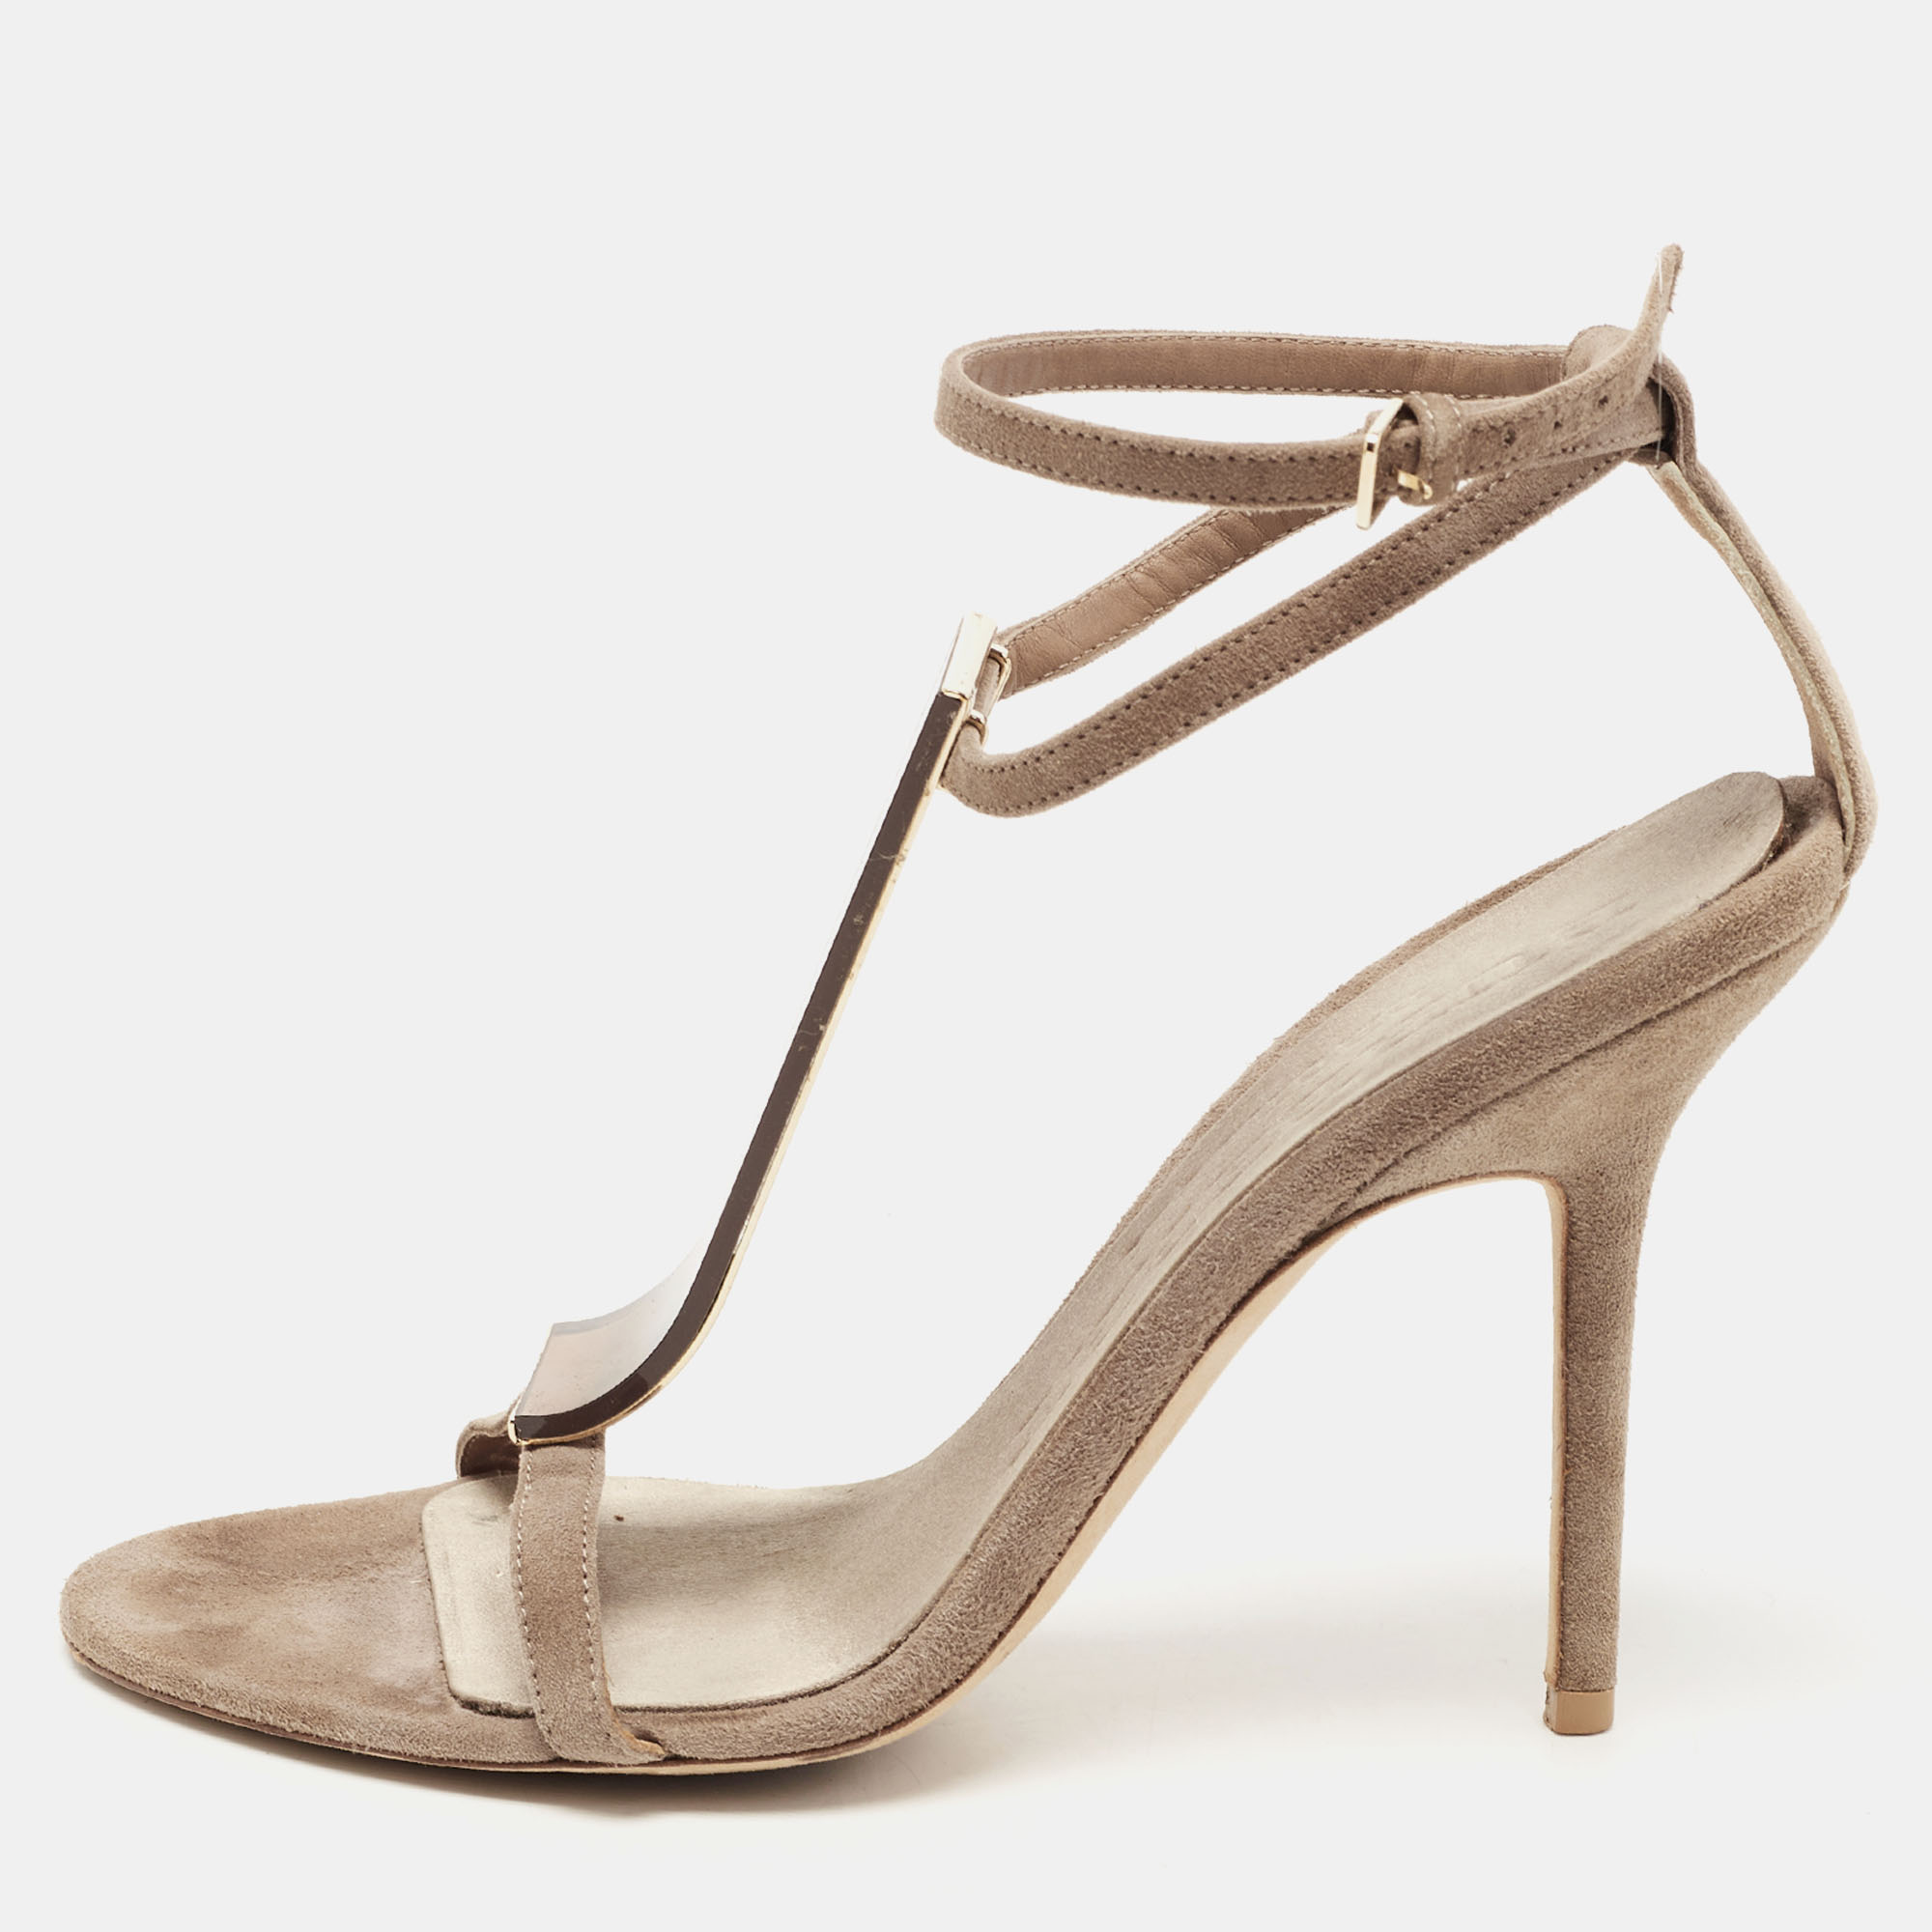 Burberry Grey Suede T Strap Sandals Size 38.5